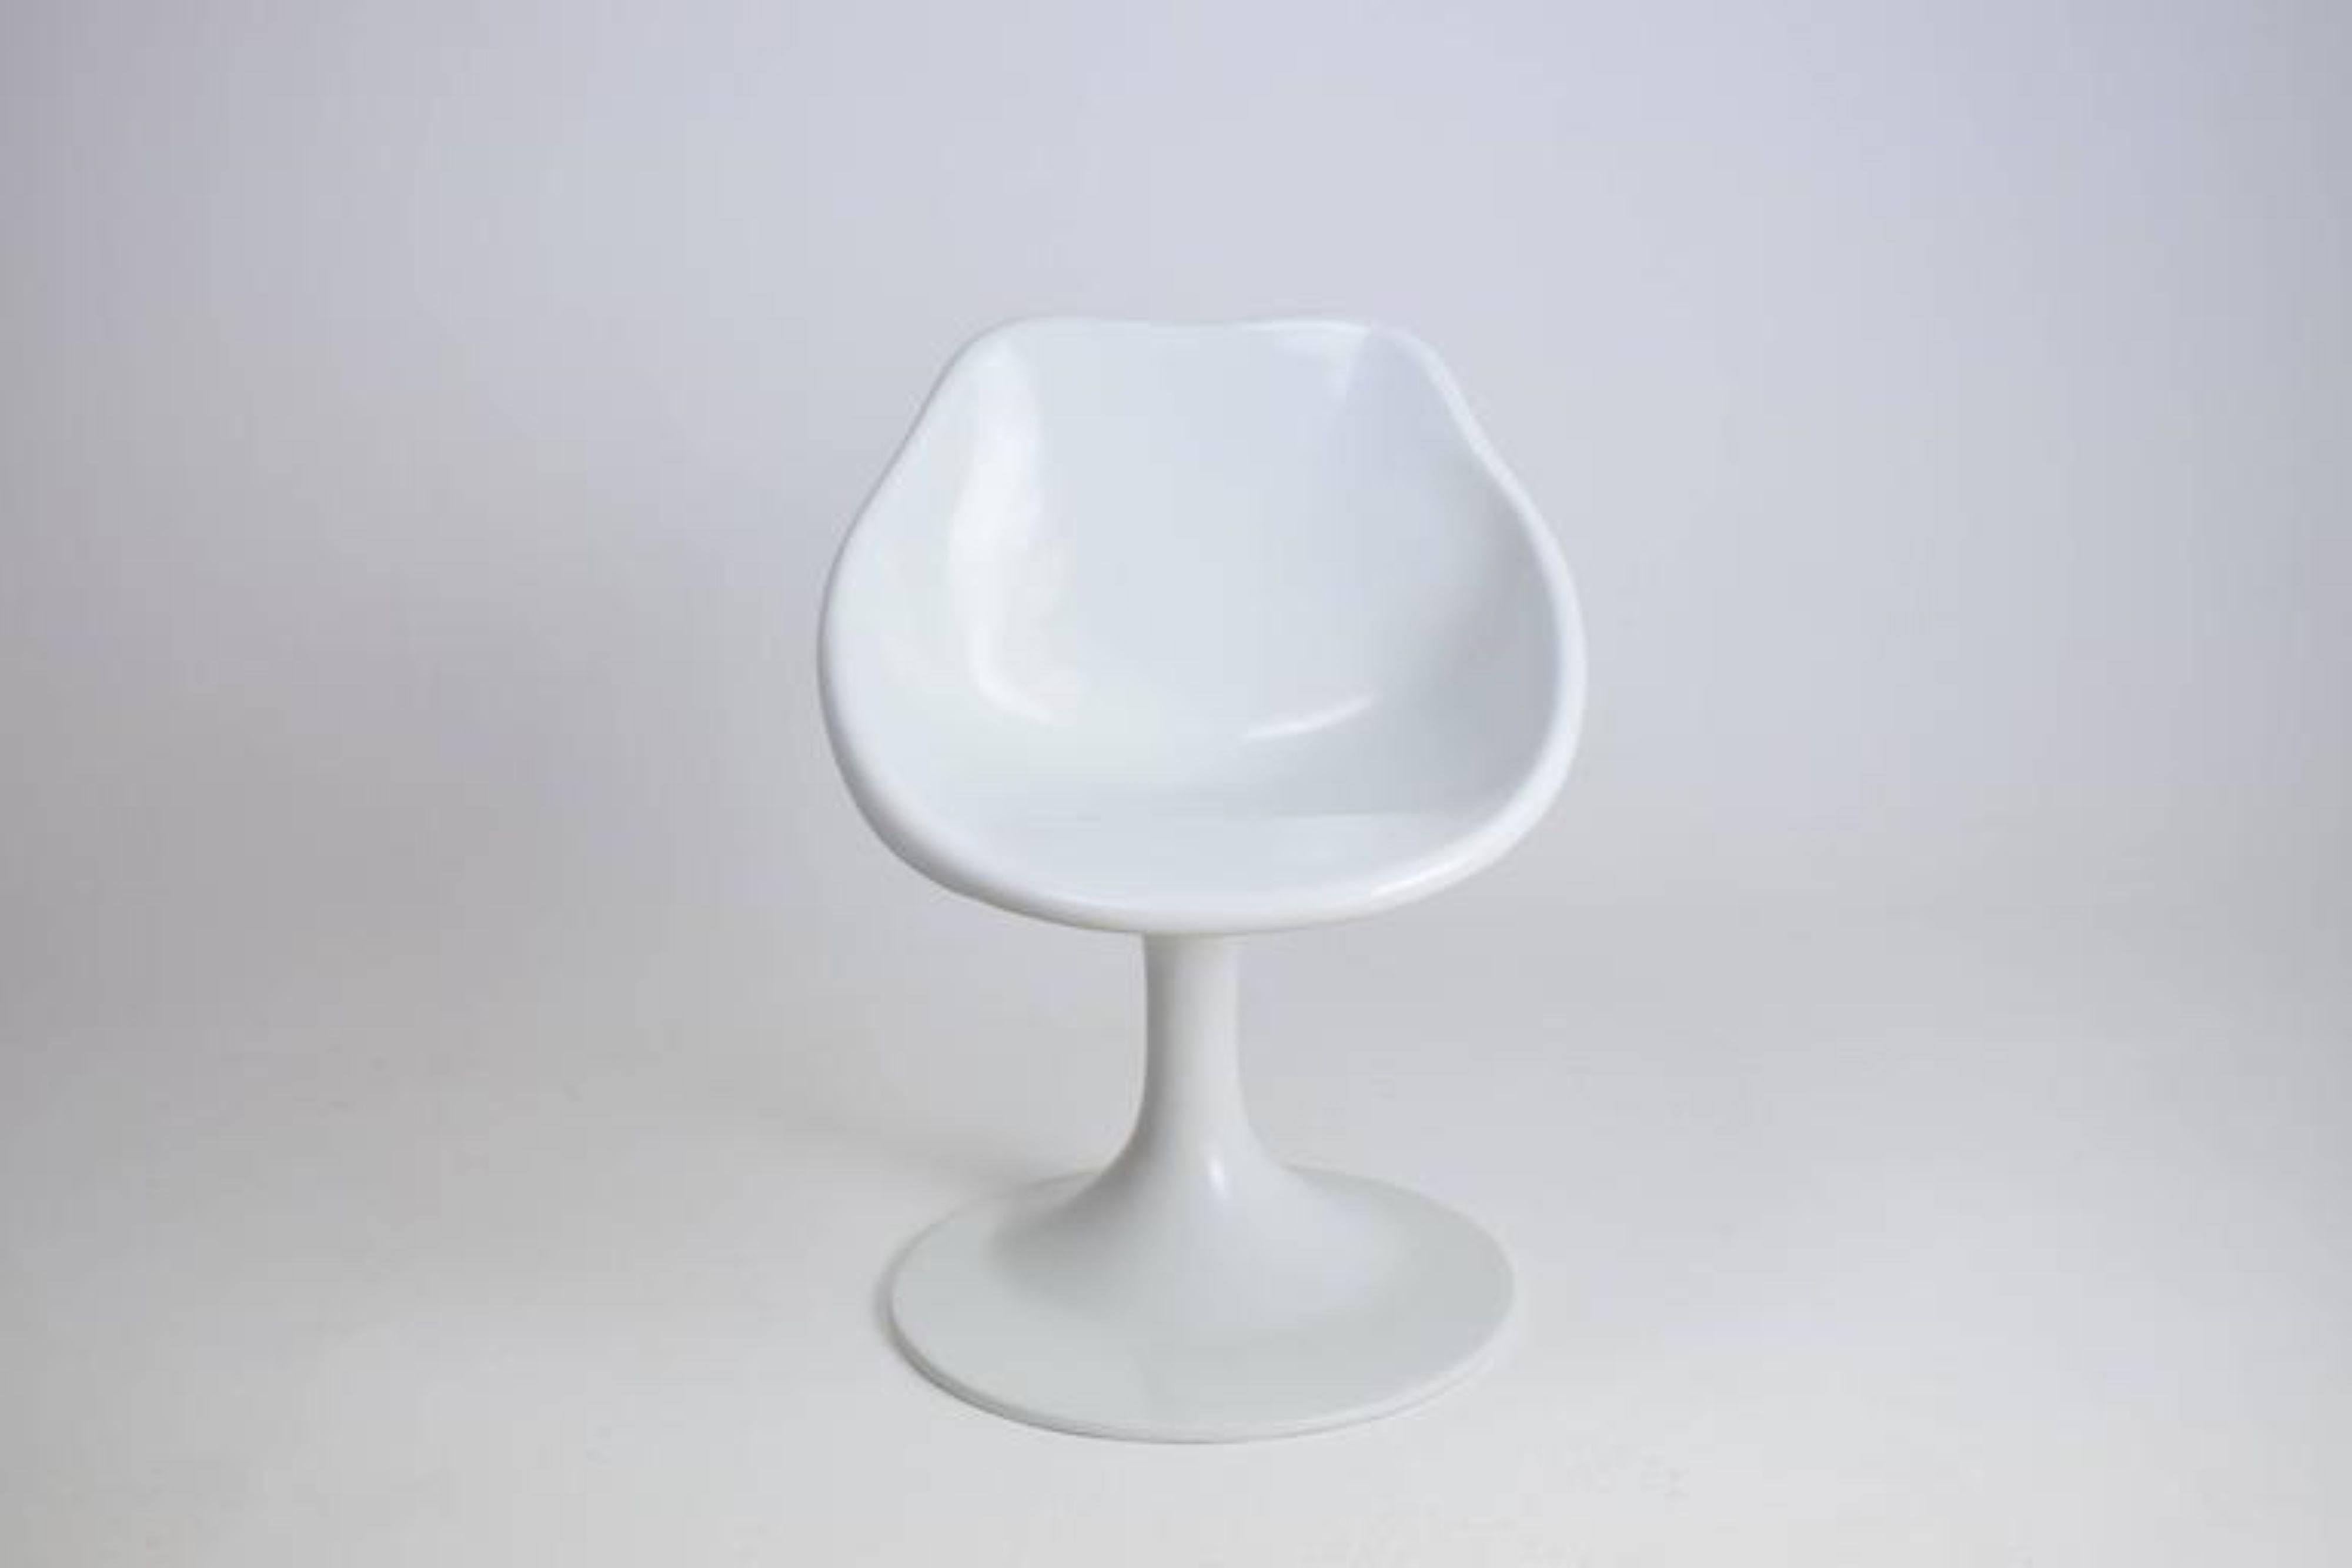 20th century vintage white fiberglass chair of space age design with futuristic curves.
In the style of the Orbit chair by Walter Grunder and Markus Farner.

Beautiful vintage condition.

-------

We are an exhibition space and an online destination